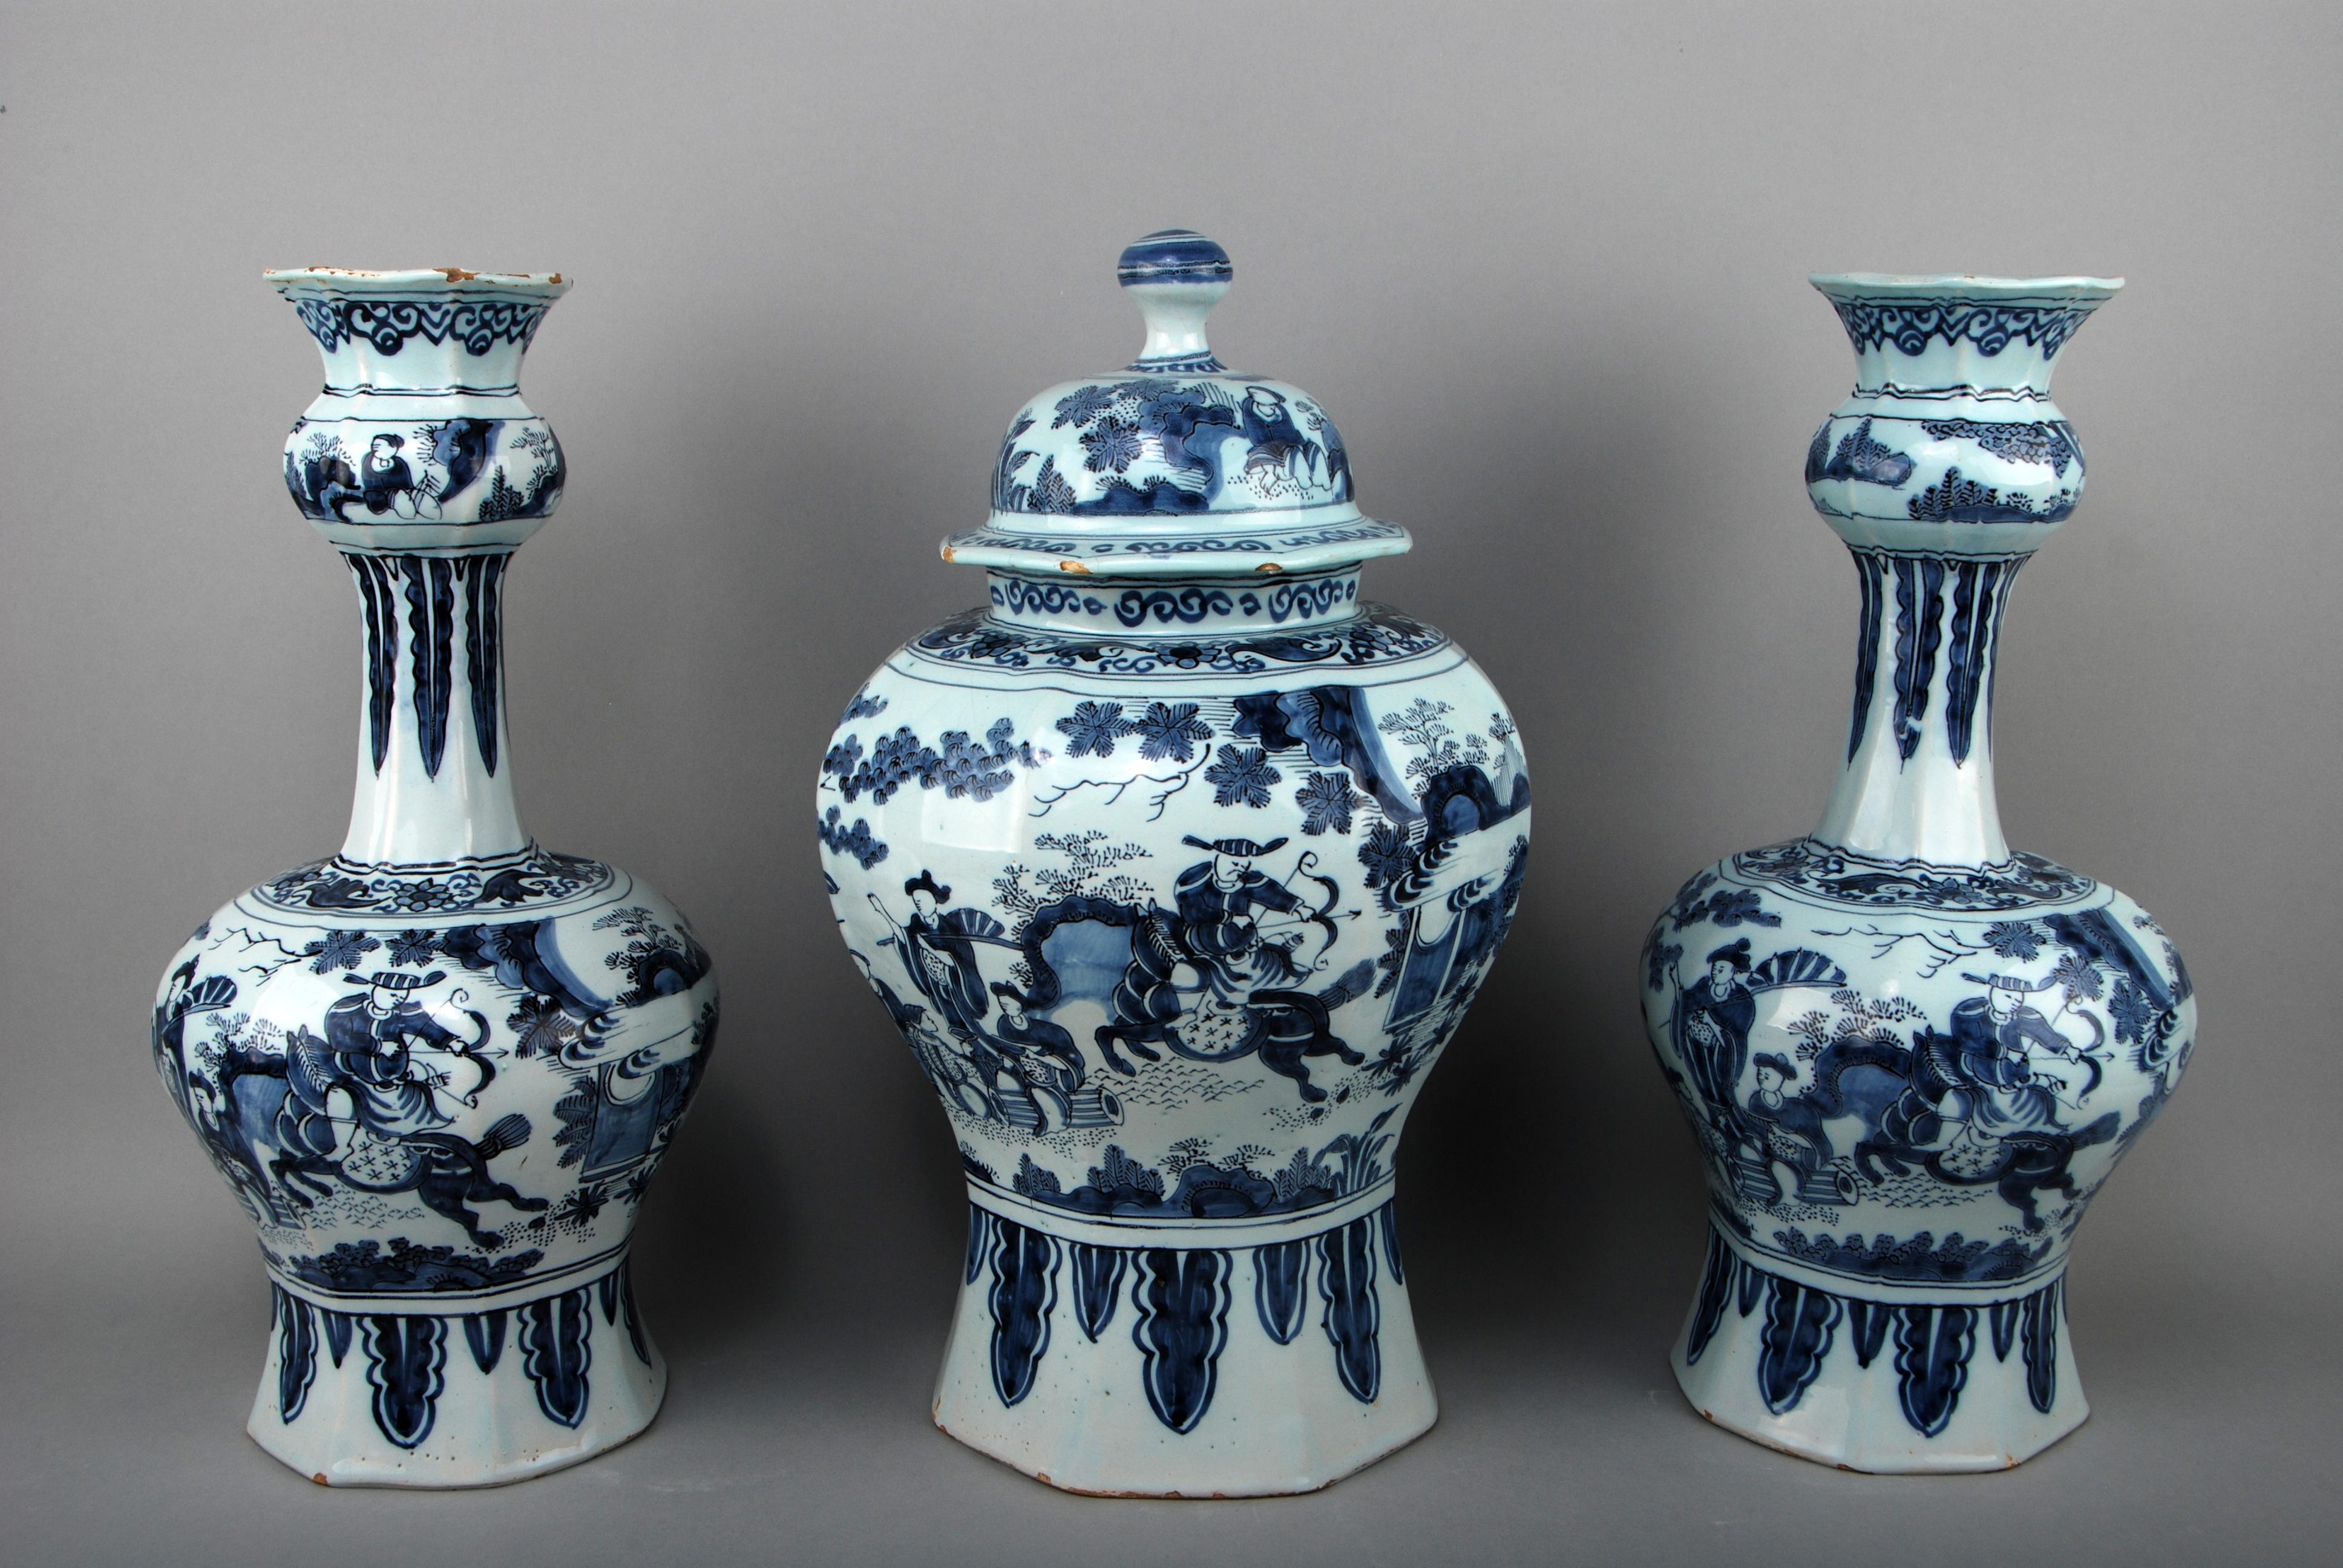 An important 17th century Delft chinoiserie three-piece garniture
The Netherlands, Delft.
Last quarter of the 17th century

An important and rare Delft garniture of three pieces. The shape and decoration are inspired on the Chinese Transitional